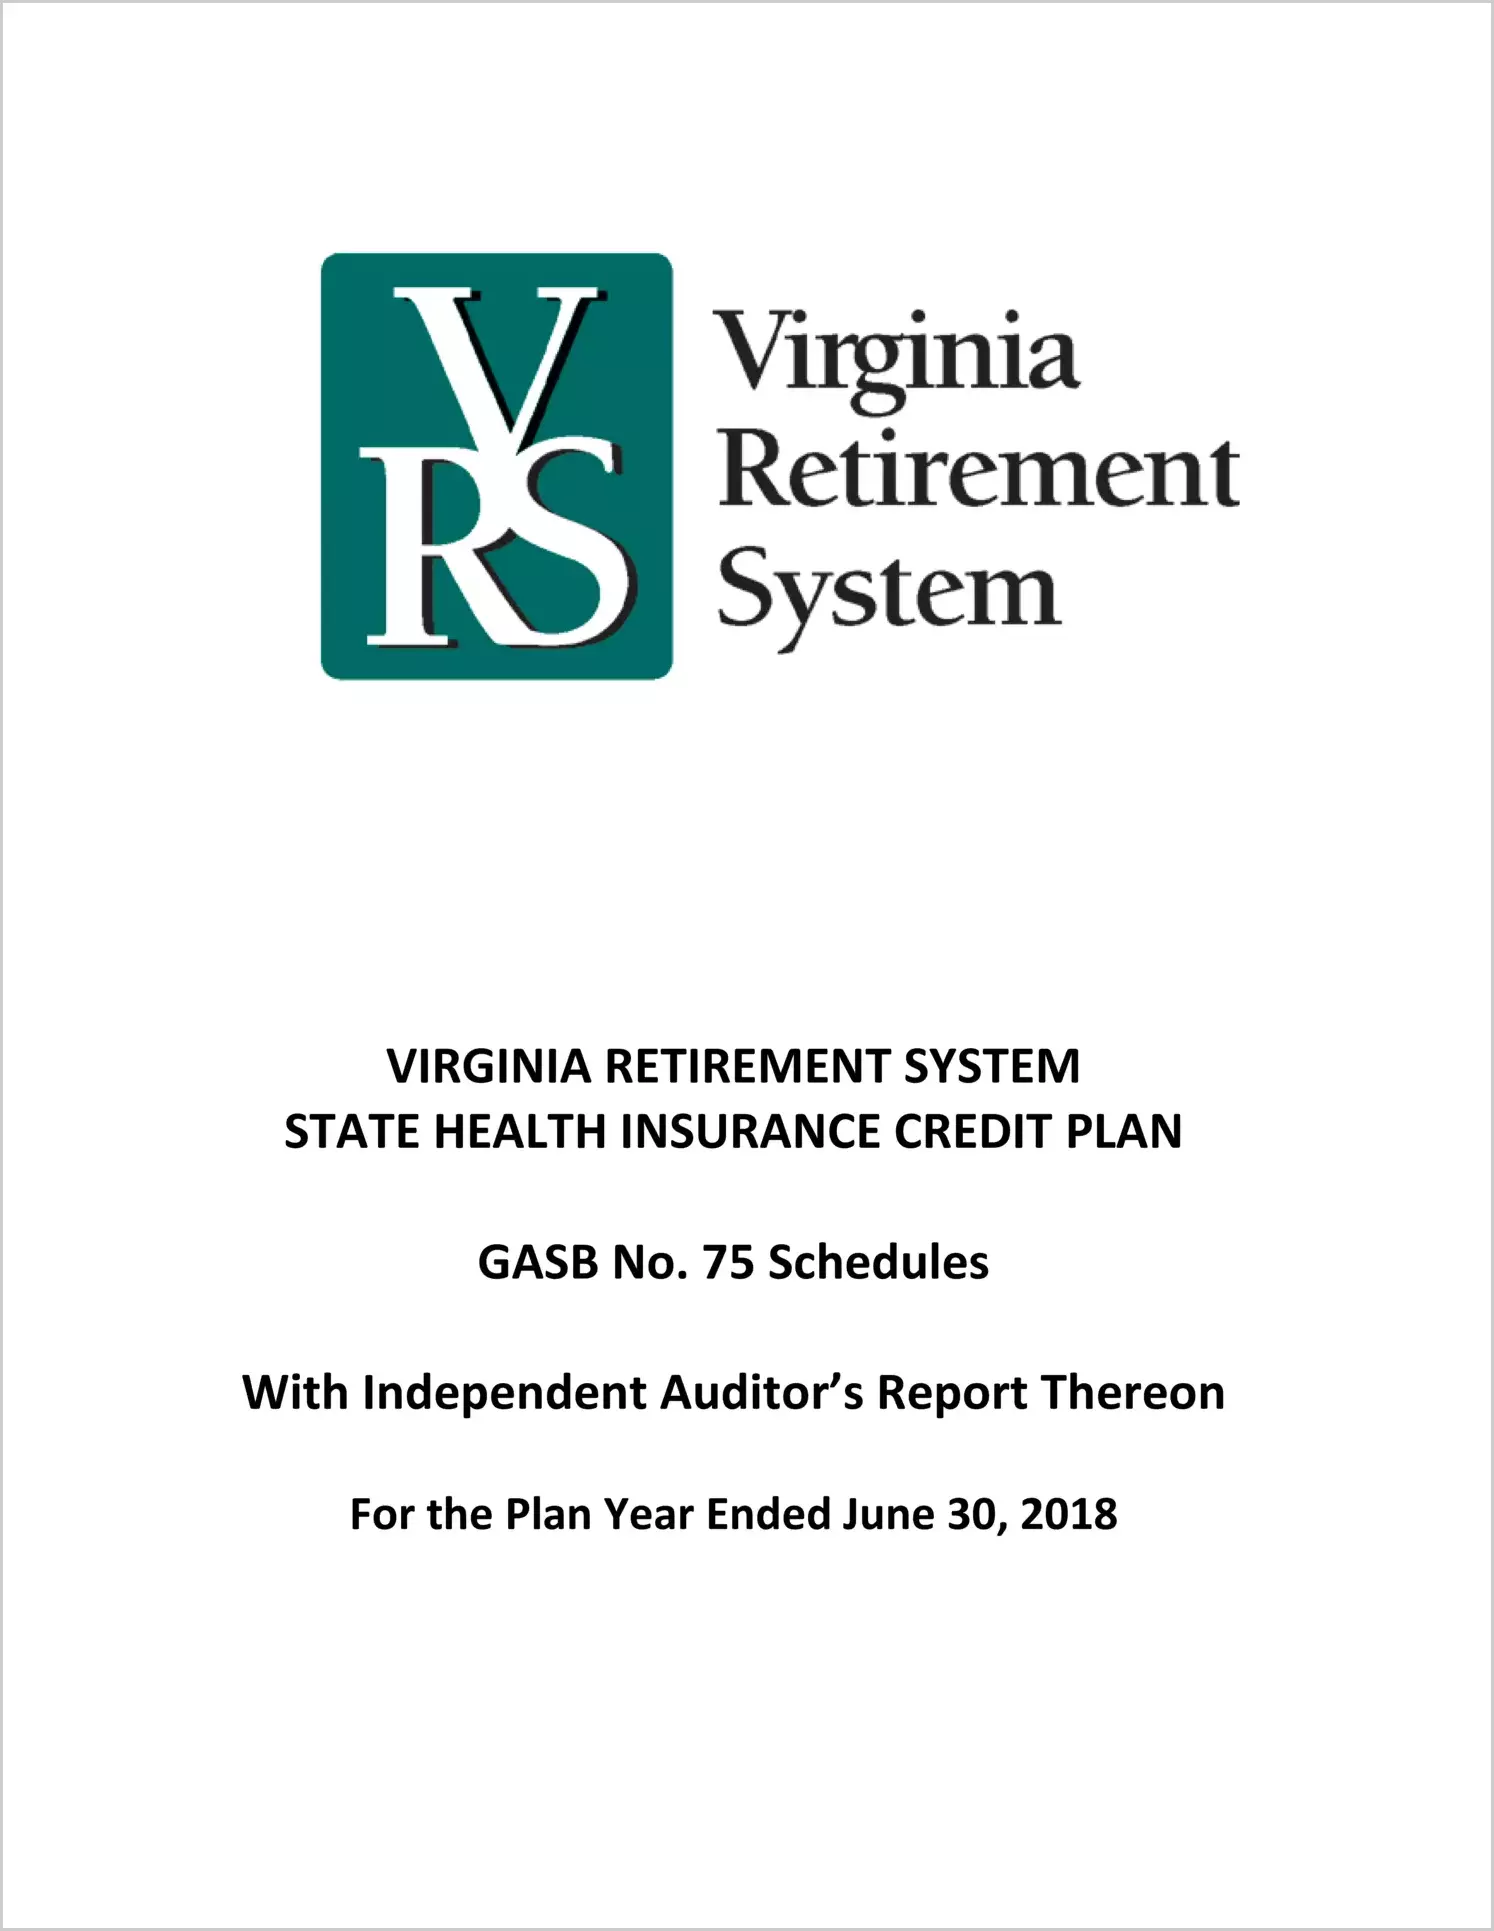 GASB 75 Schedule - Virginia Retirement System State Health Insurance Credit Plan for the plan year ended June 30, 2018